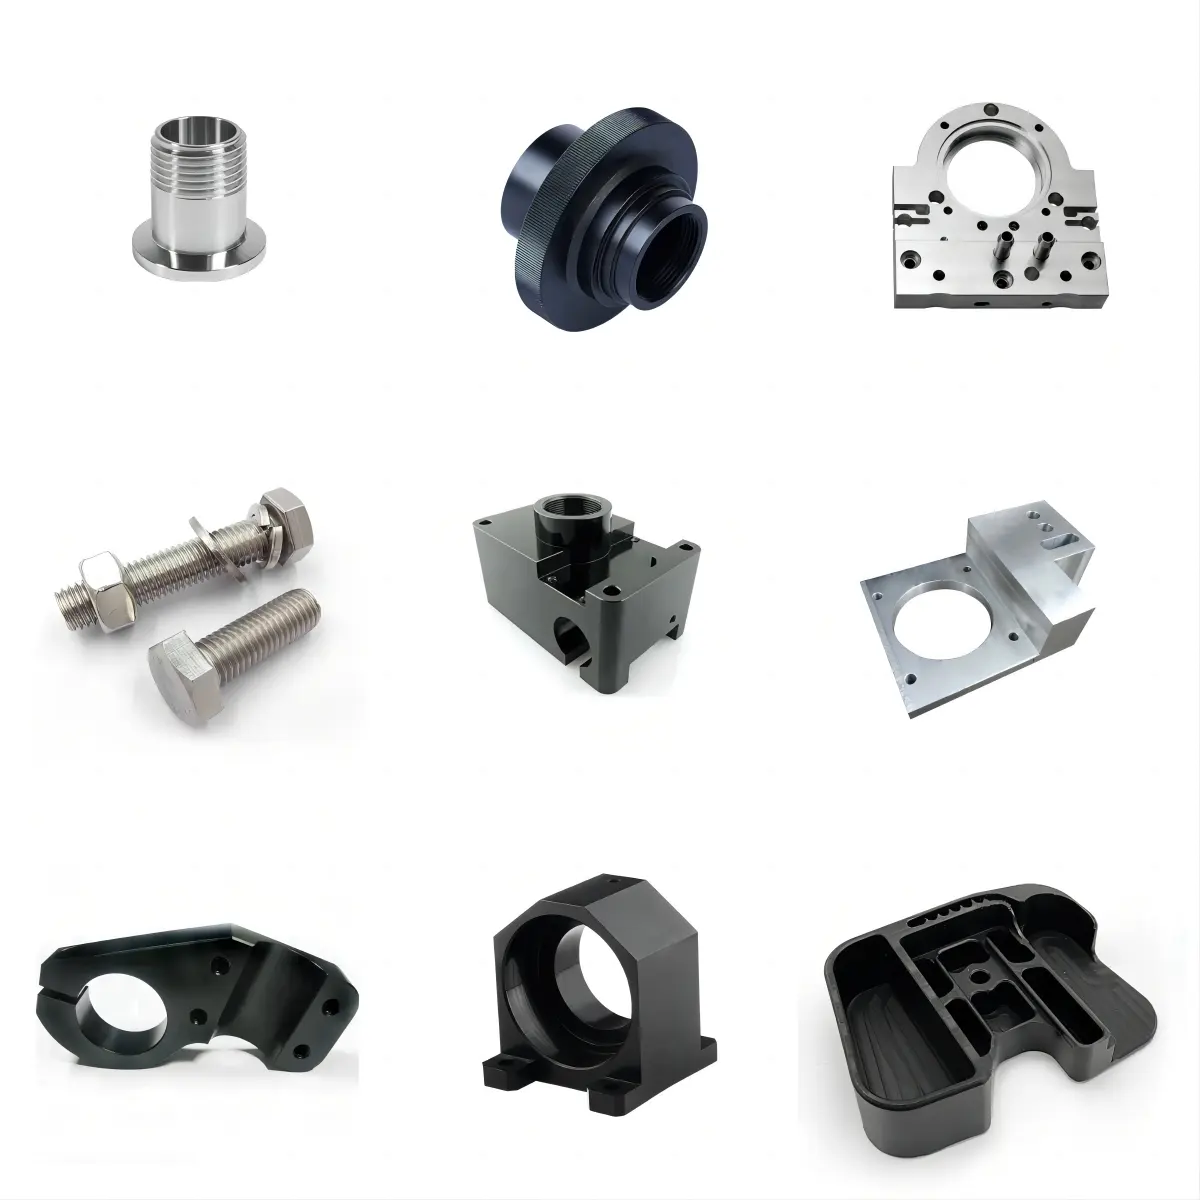 Huarui Aluminum Parts Hardware Accessories CNC Machining Machinery Services with 4axis 5 axis Machine